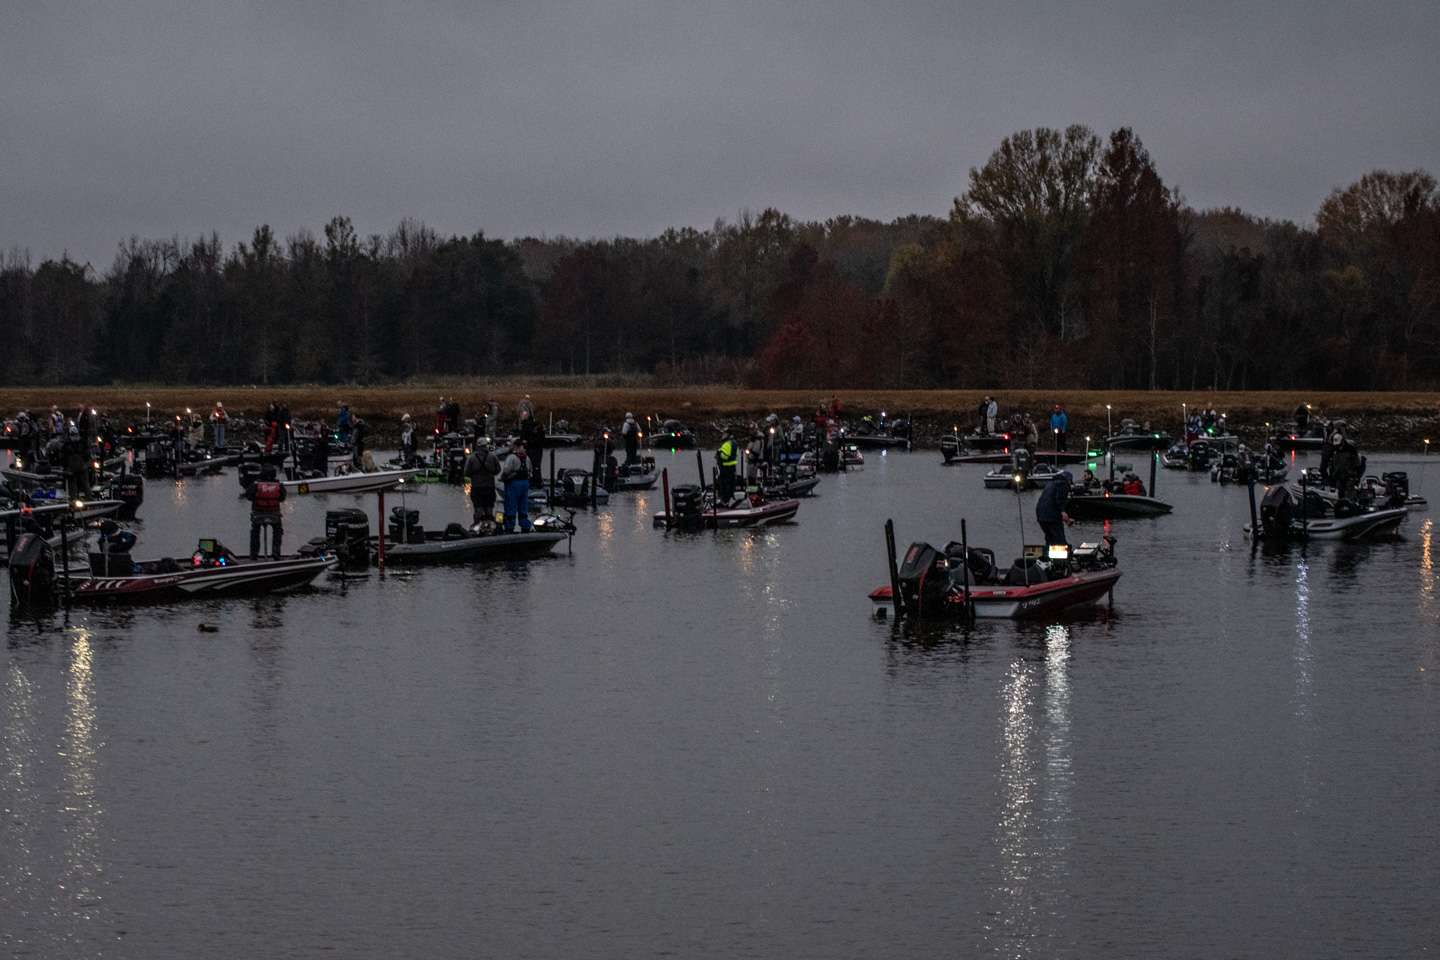 Take a look at the early action on Day 1 of the Bassmaster Team Championship at Lake Eufaula. 